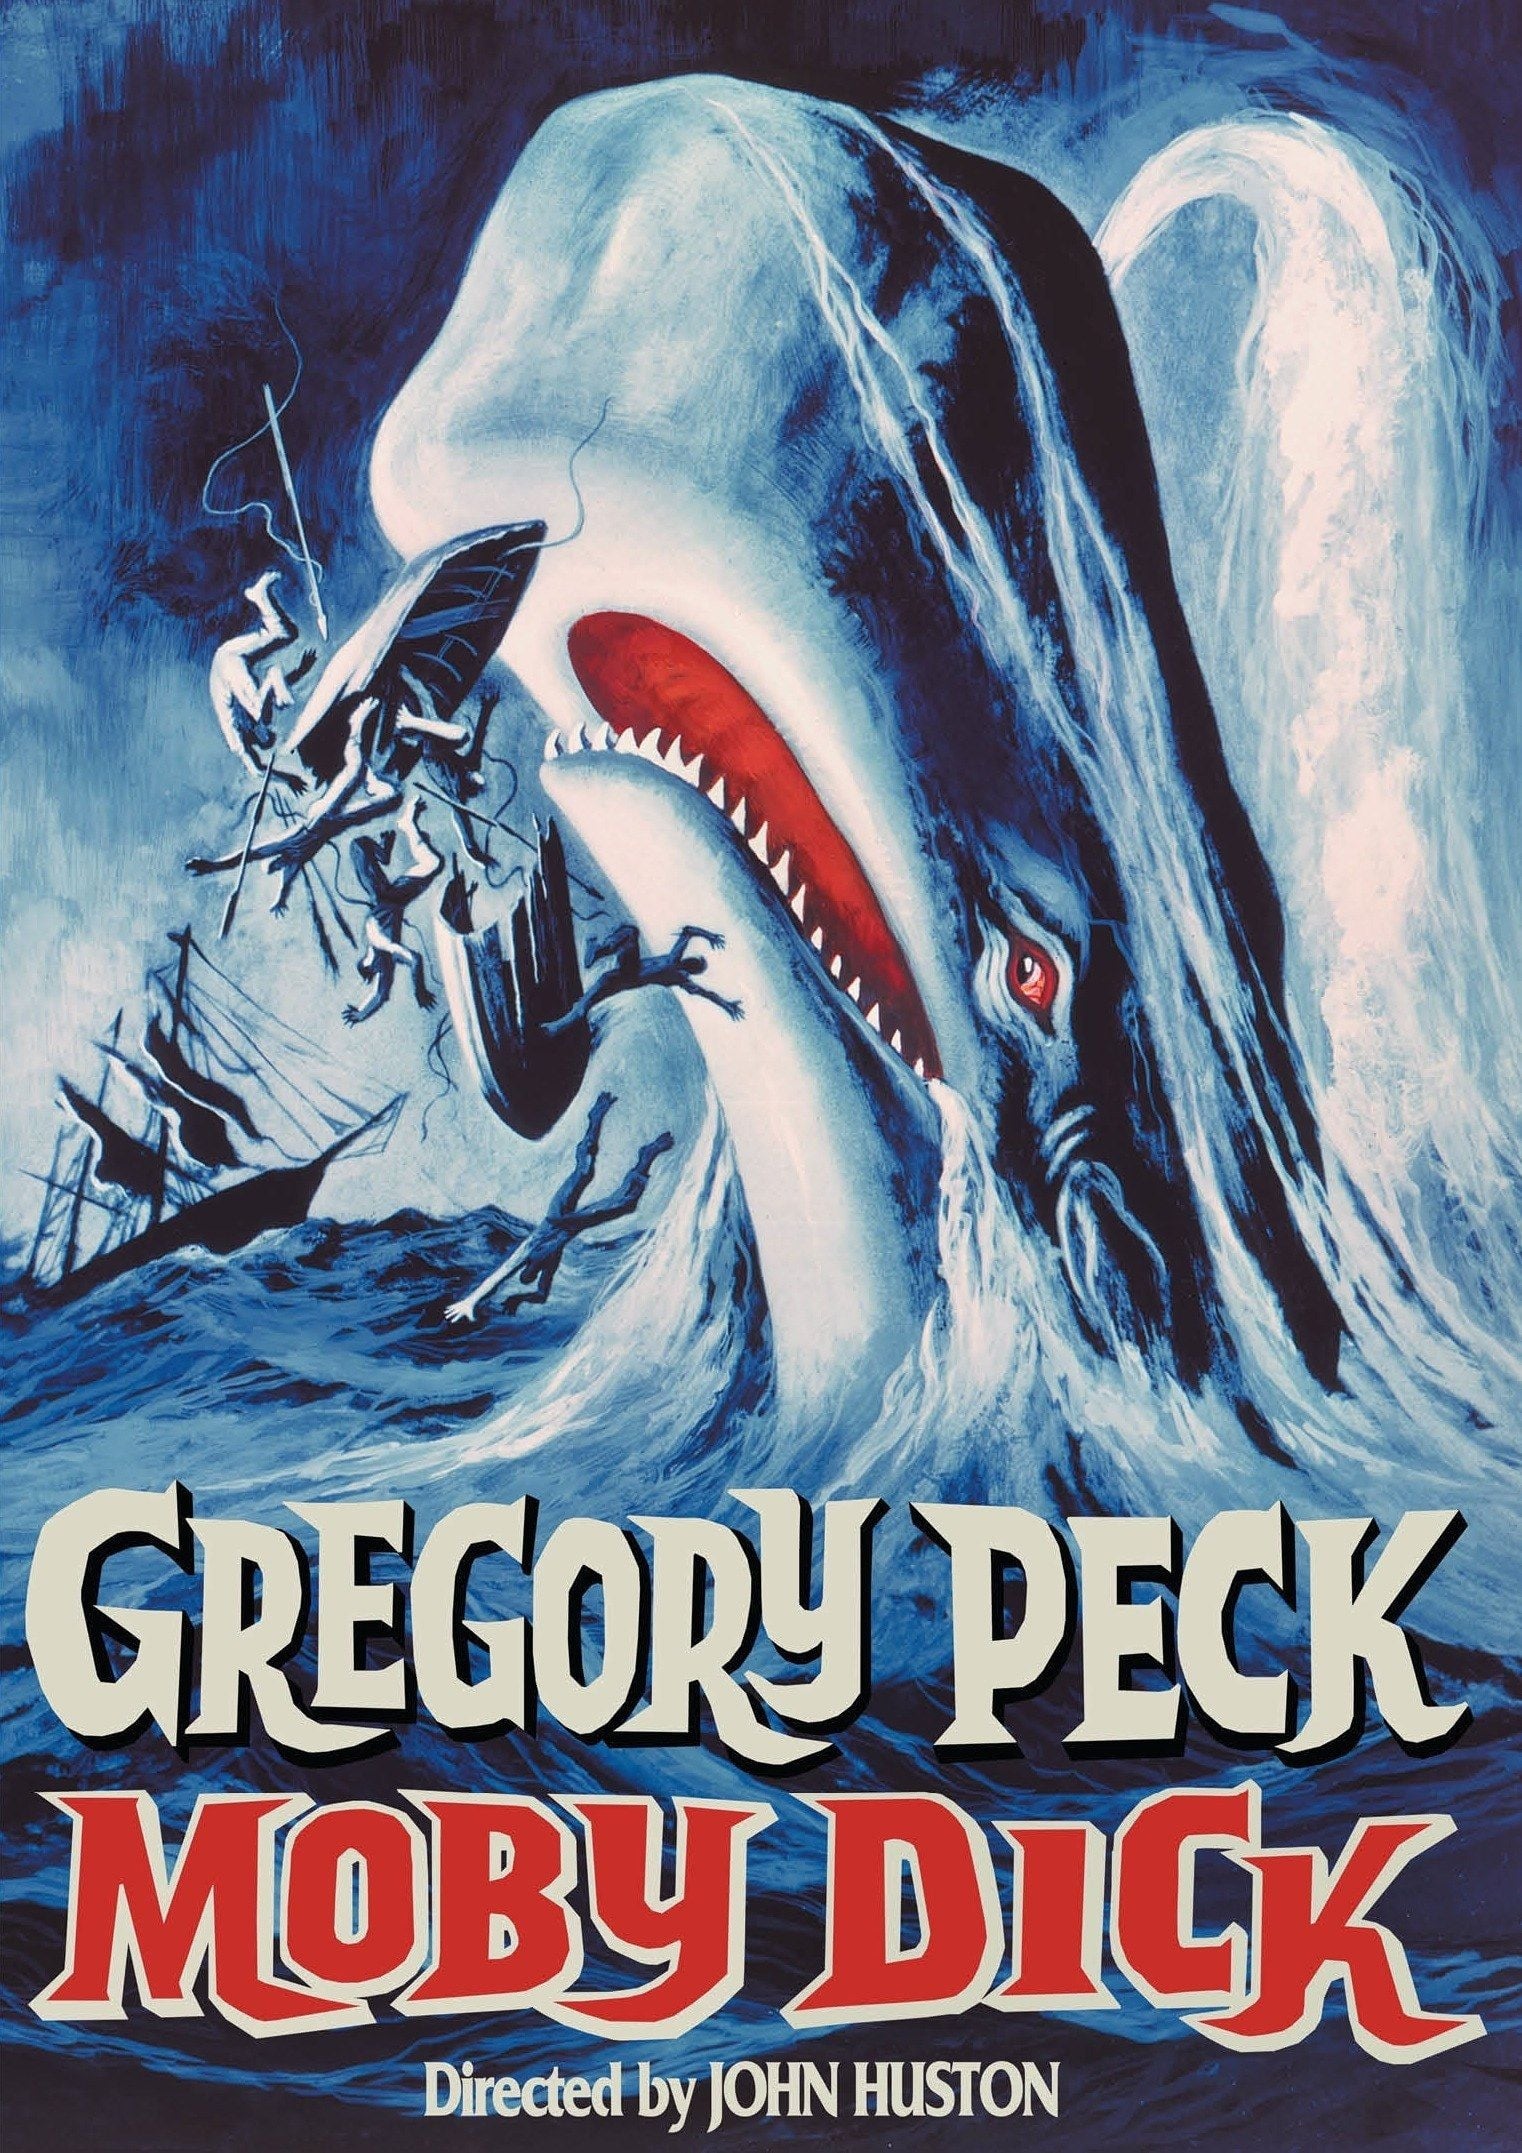 Grego moby dick